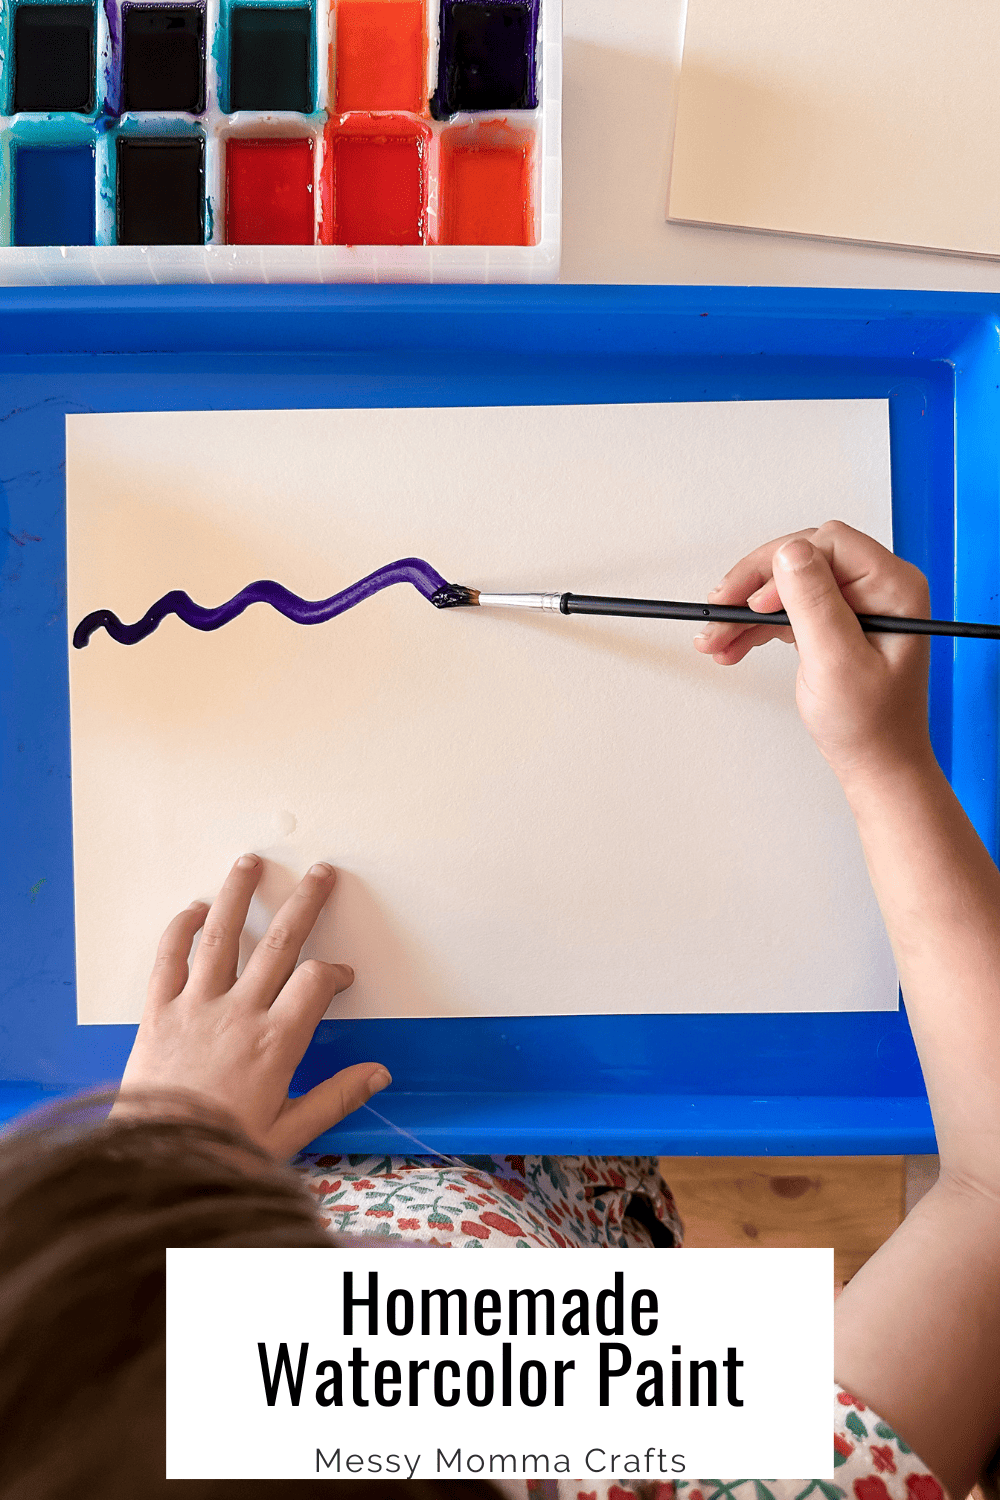 Child painting with homemade watercolor paints in a purple color. Homemade watercolor paints in an ice cube tray in the top left of the photo.